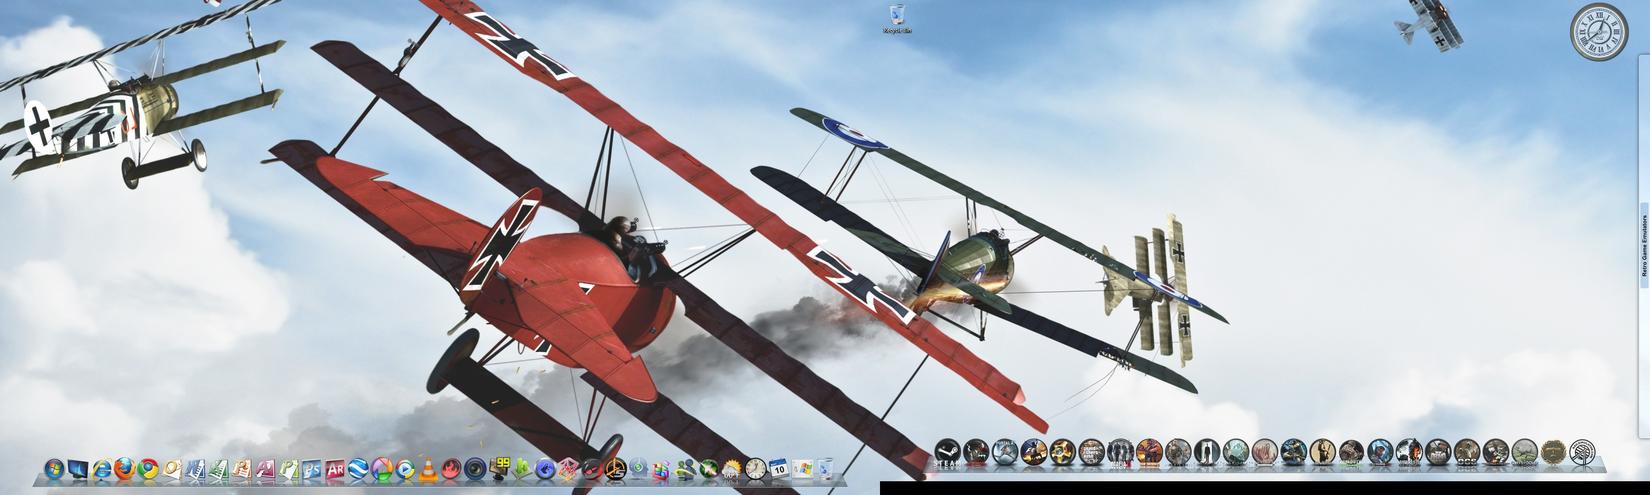 Good Source For Ww1 Aircraft Wallpaper Rise Of Flight The First